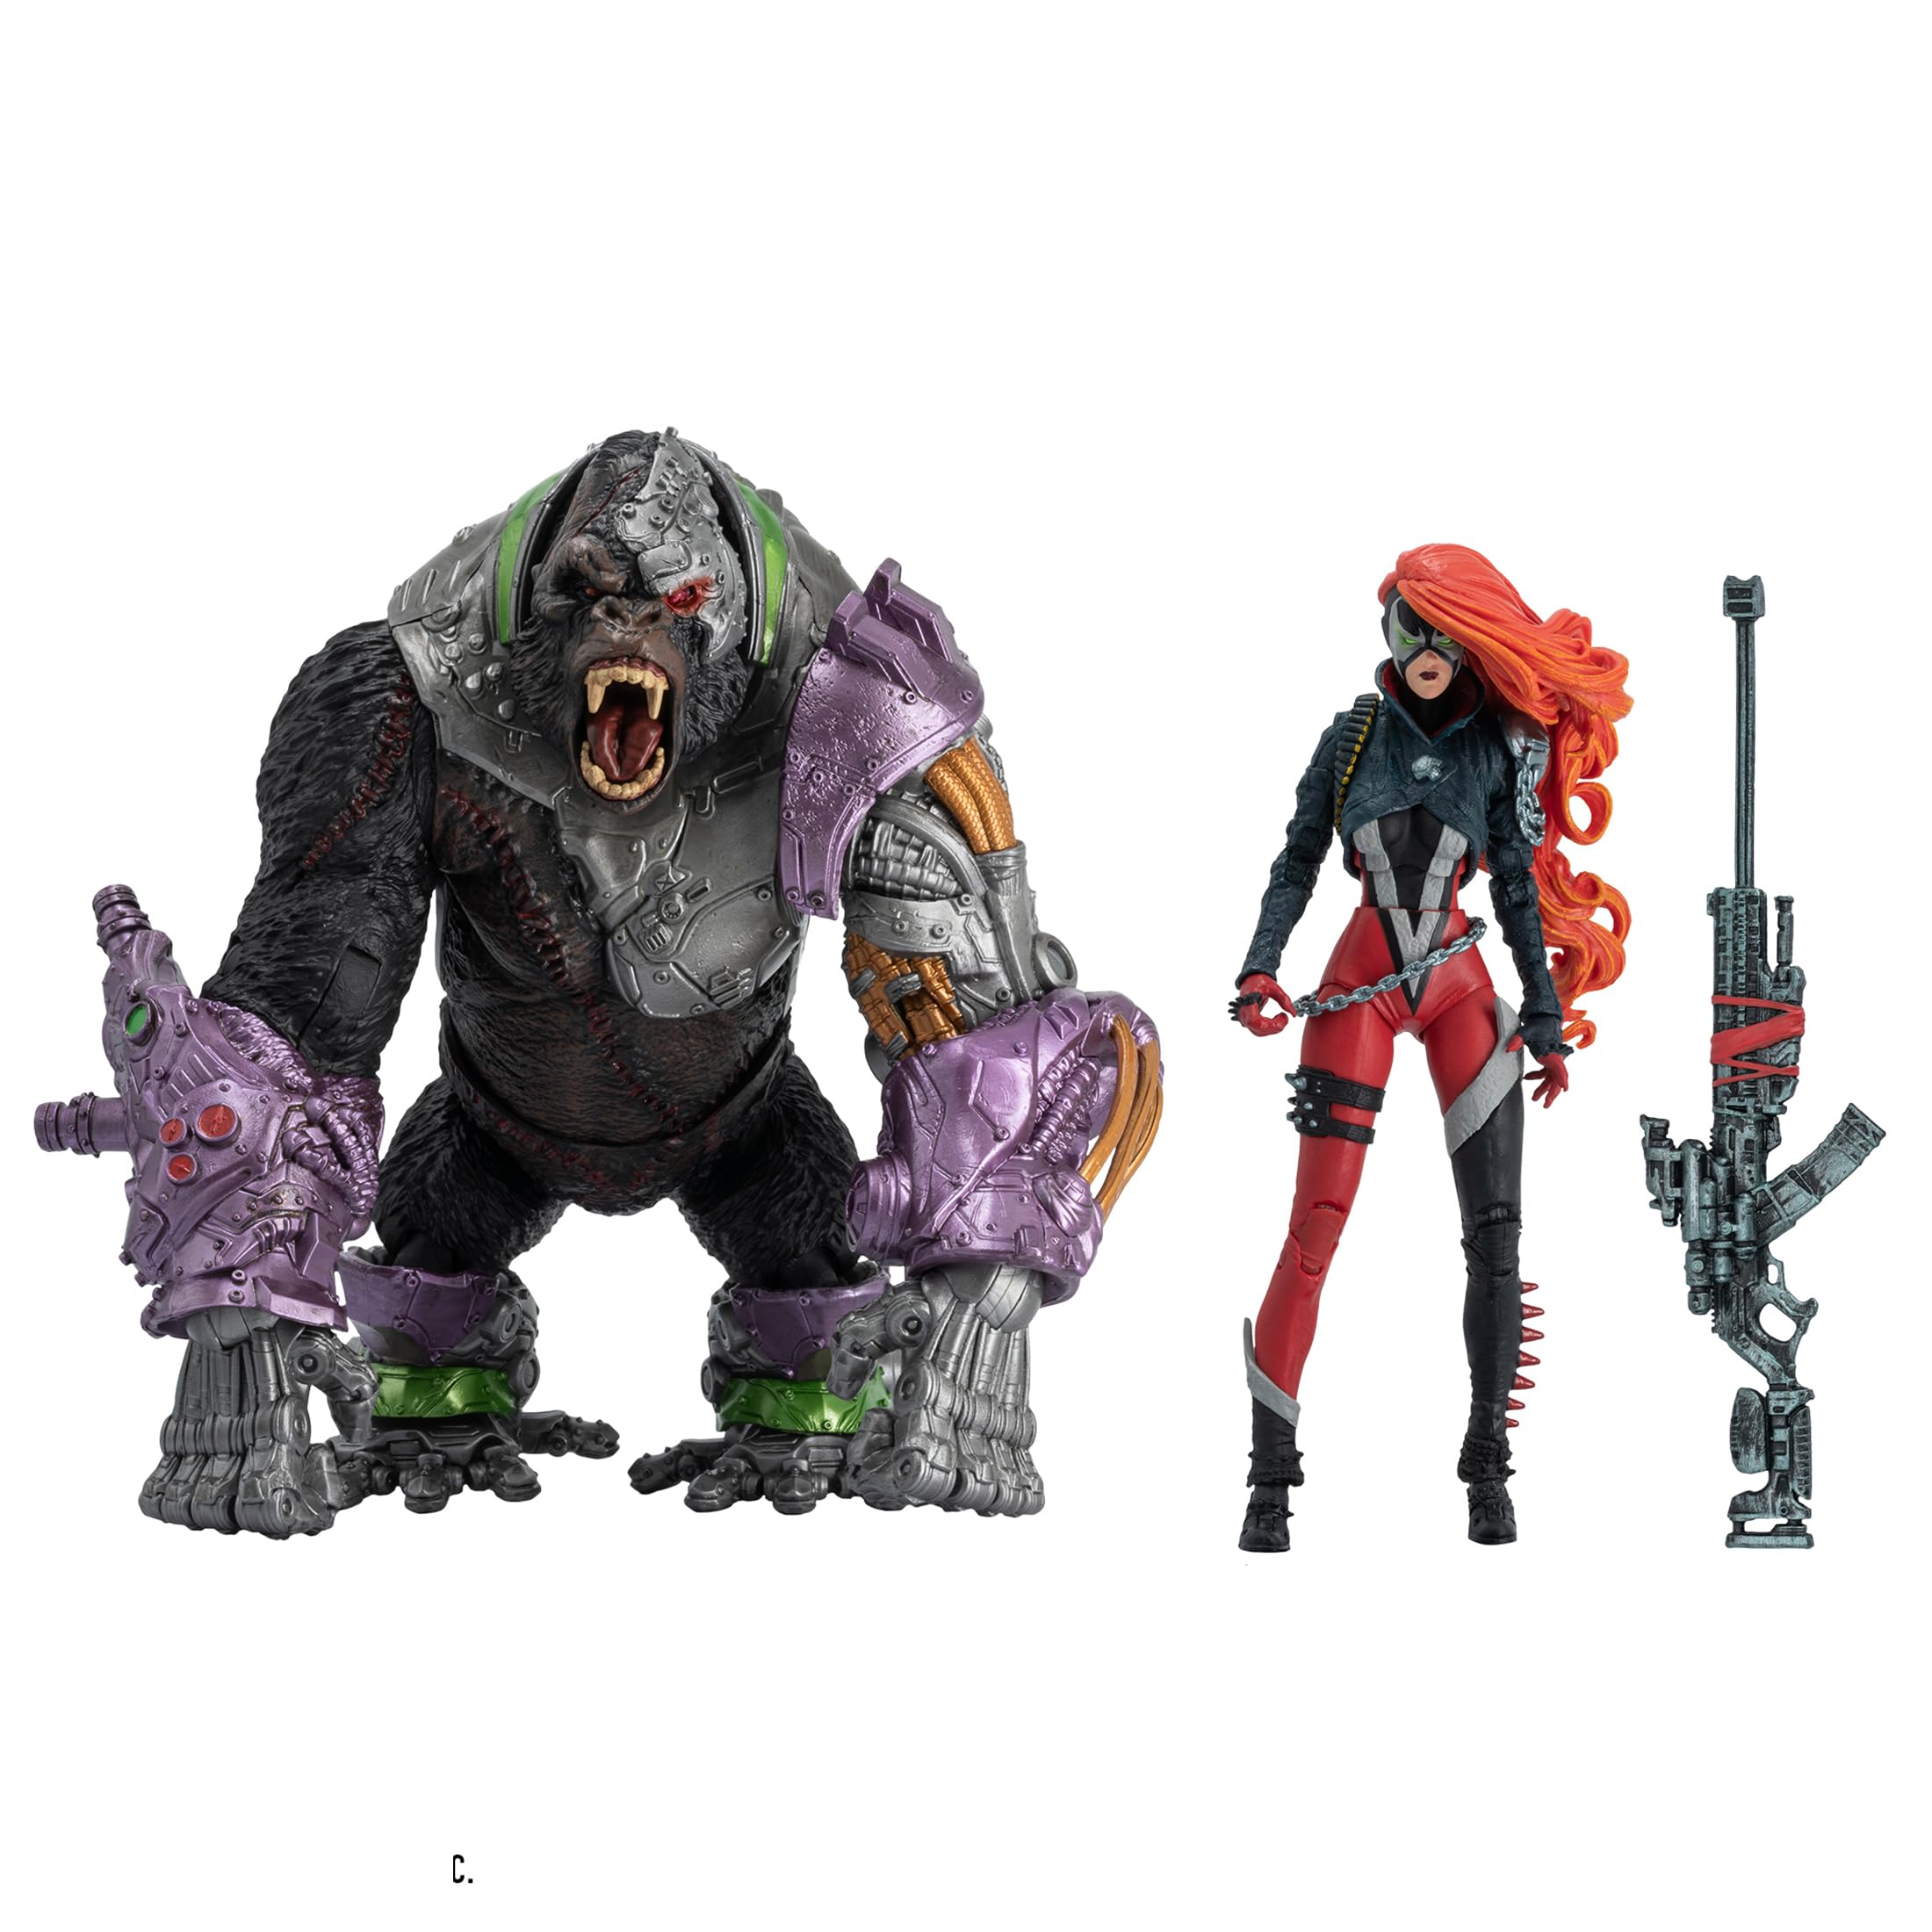 2-Pack 7" Scale McFarlane Toys Gold Label Spawn She-Spawn & Cygor Action Figures $24 + Free Shipping w/ Prime or on $35+